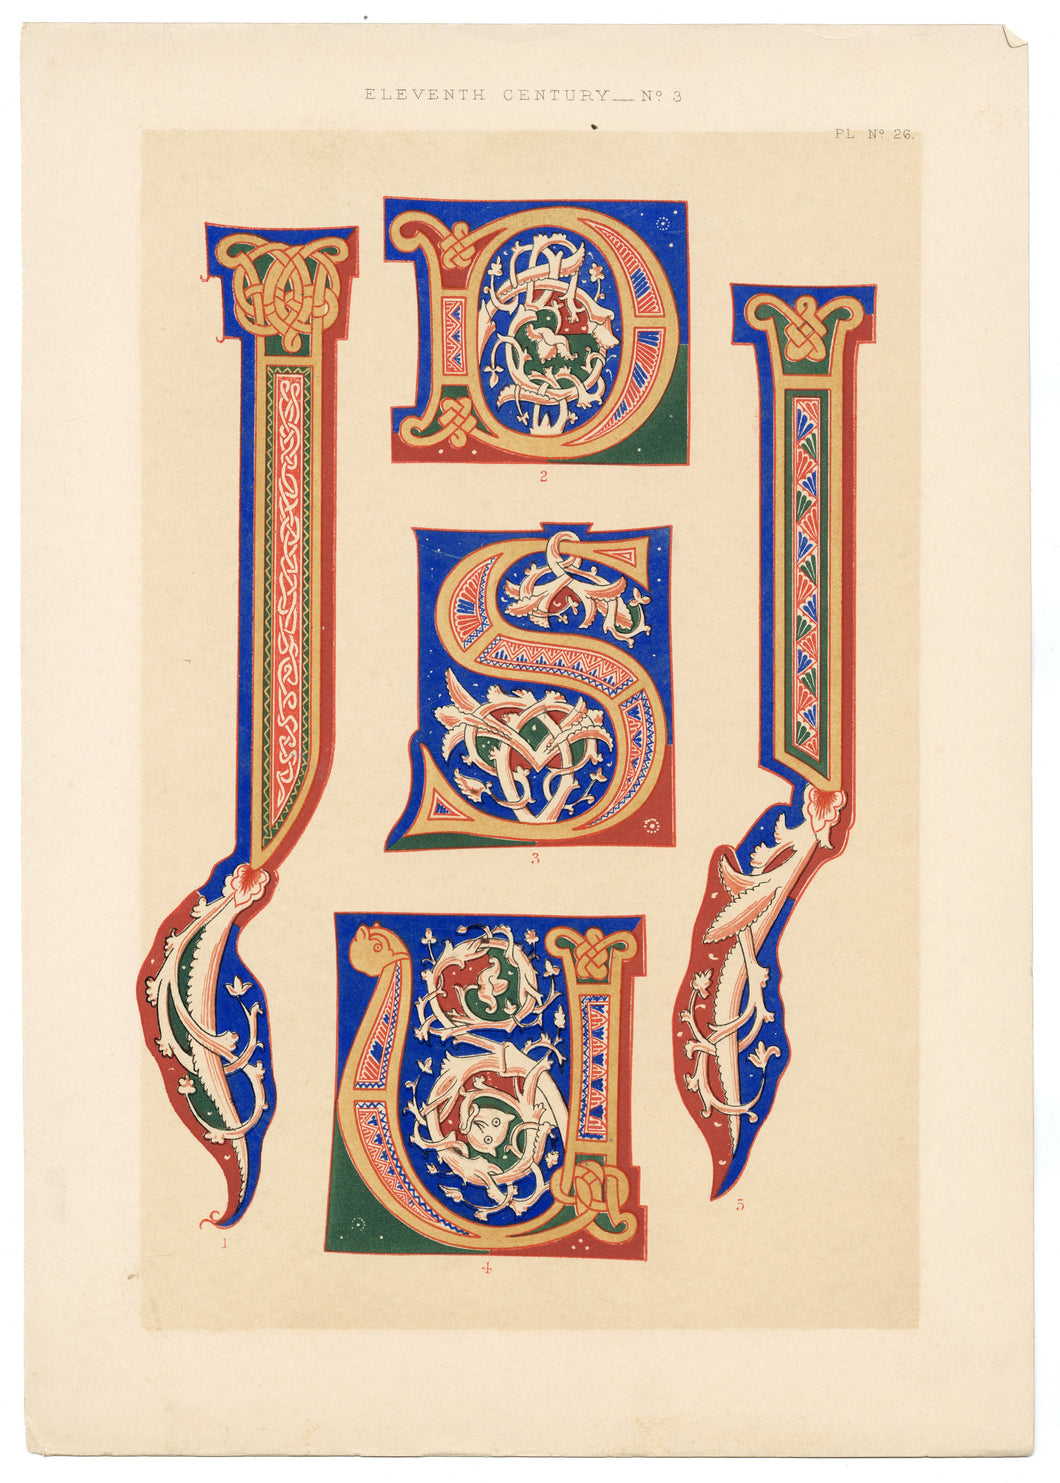 Beautiful Chromolithograph Book Plate Illuminated Letters About 100 Years Old - Plate Number 26